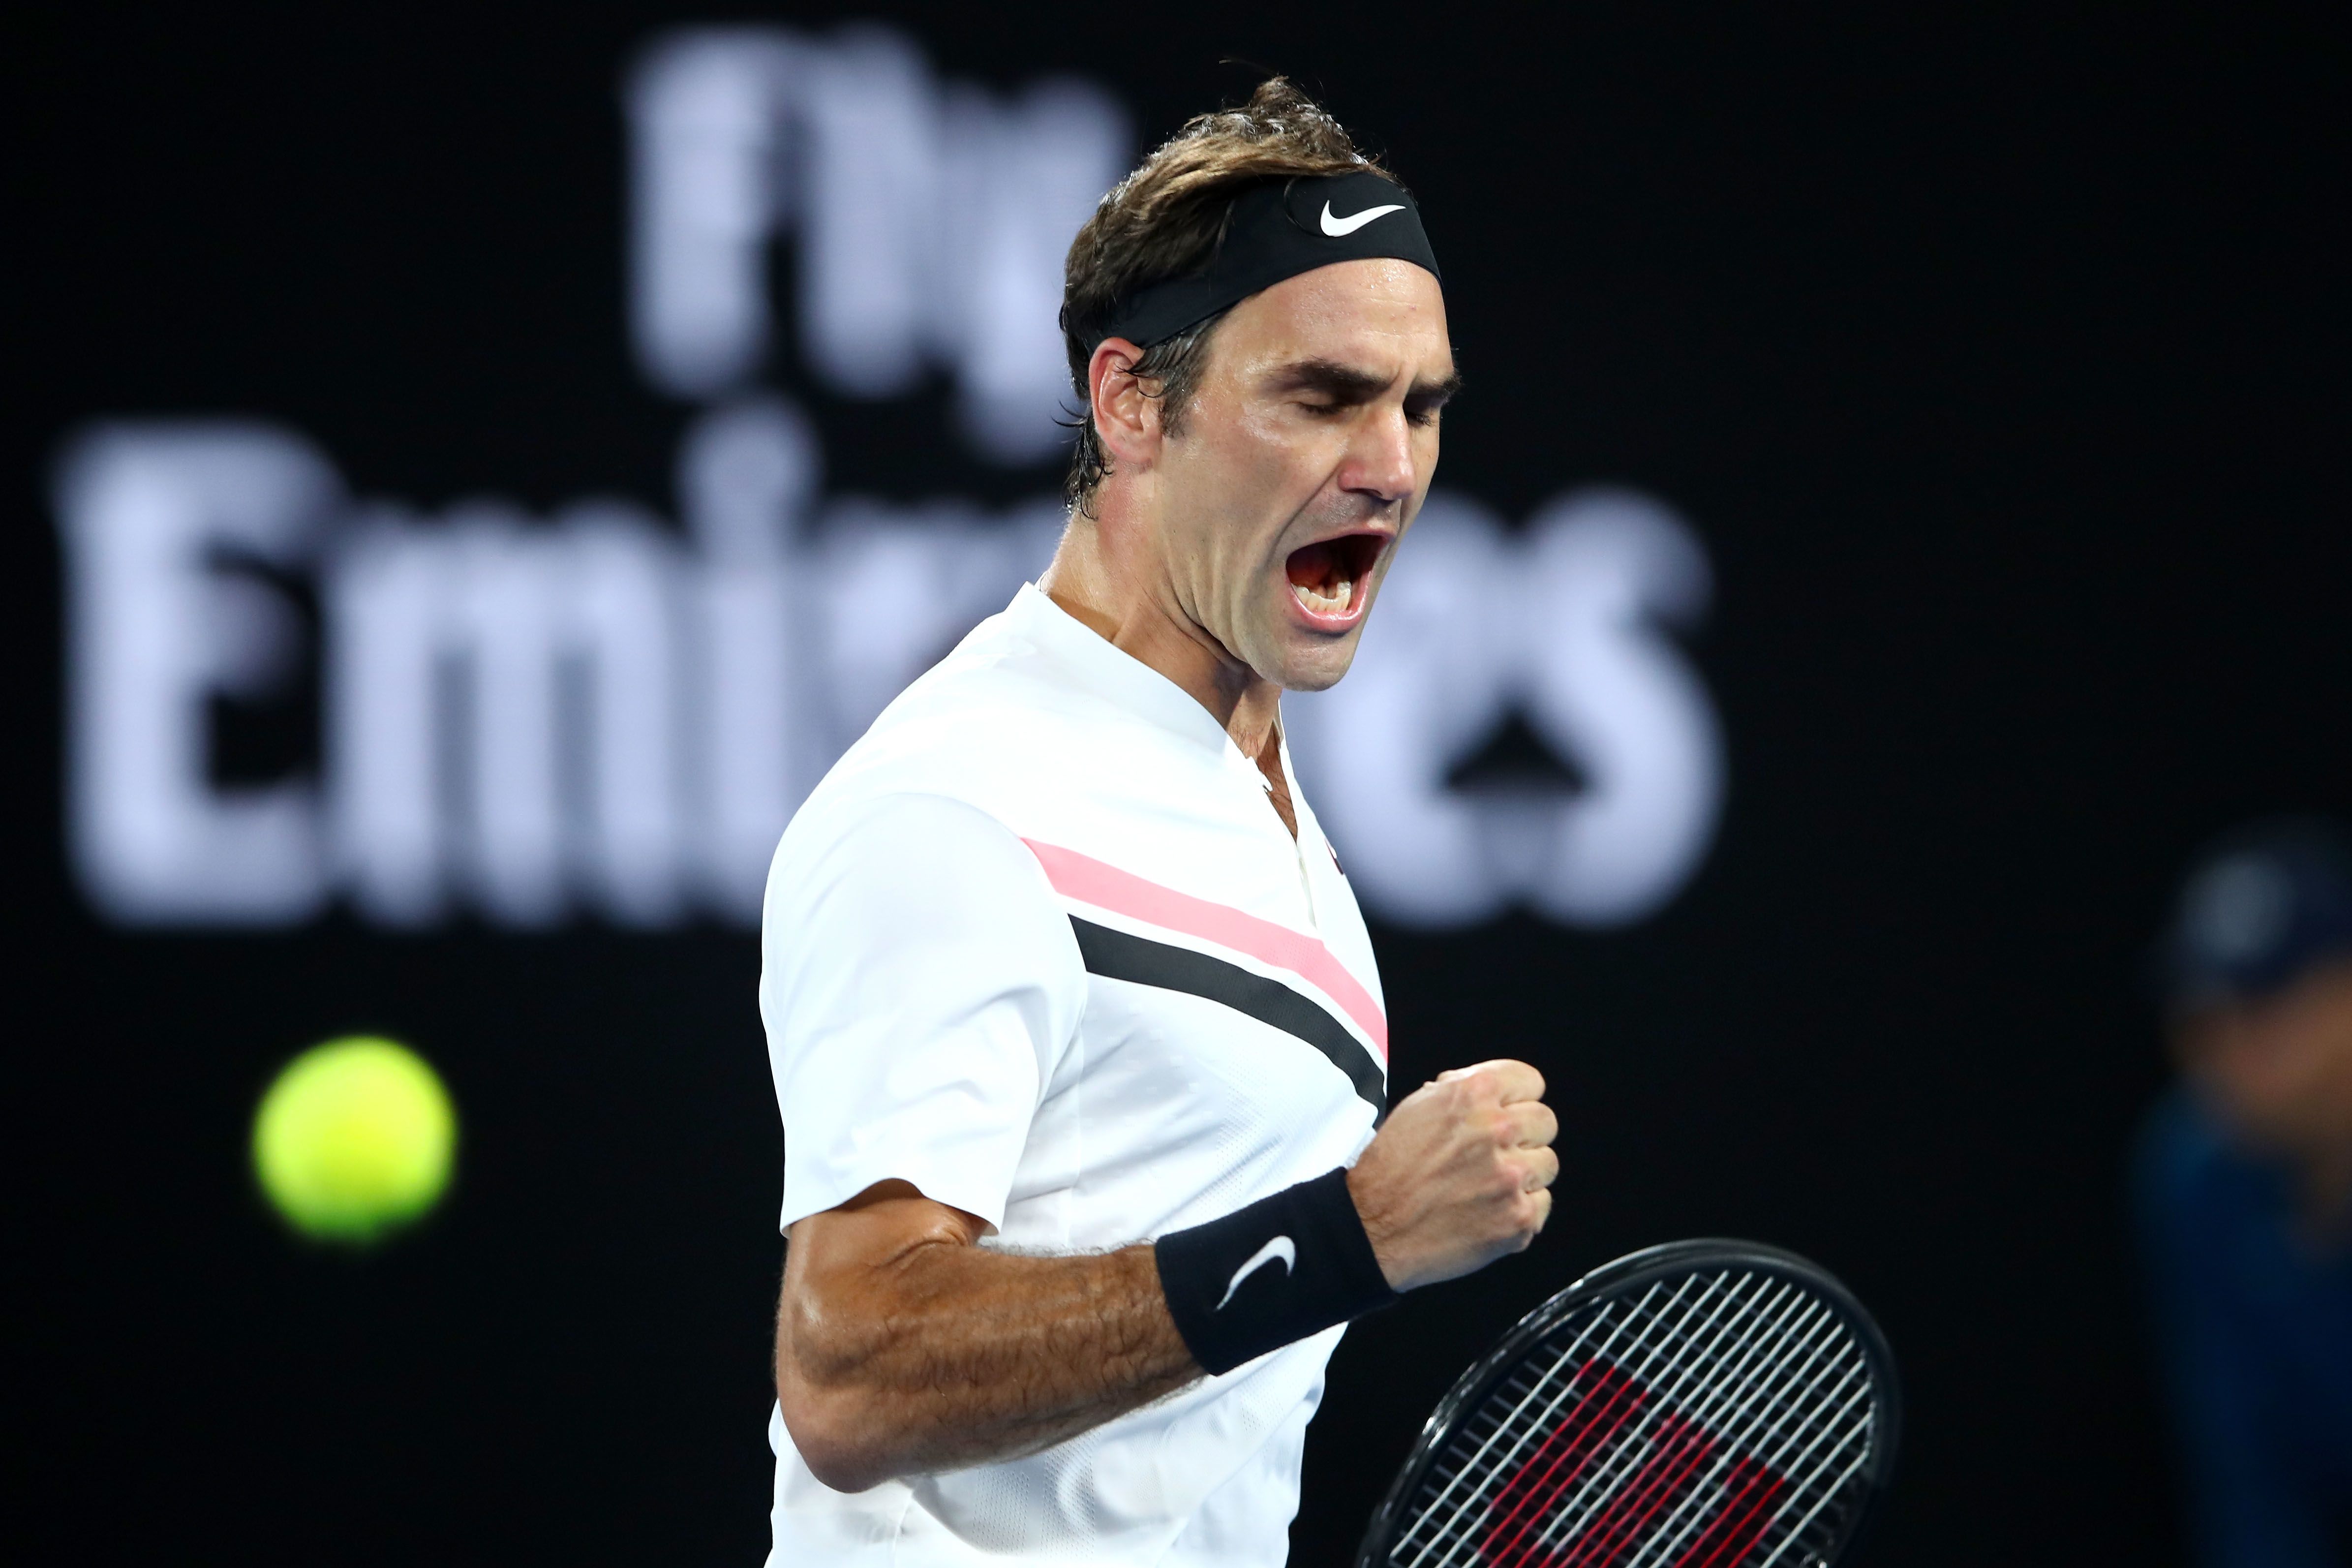 Roger Federer wins Australian Open and 20th major after beating